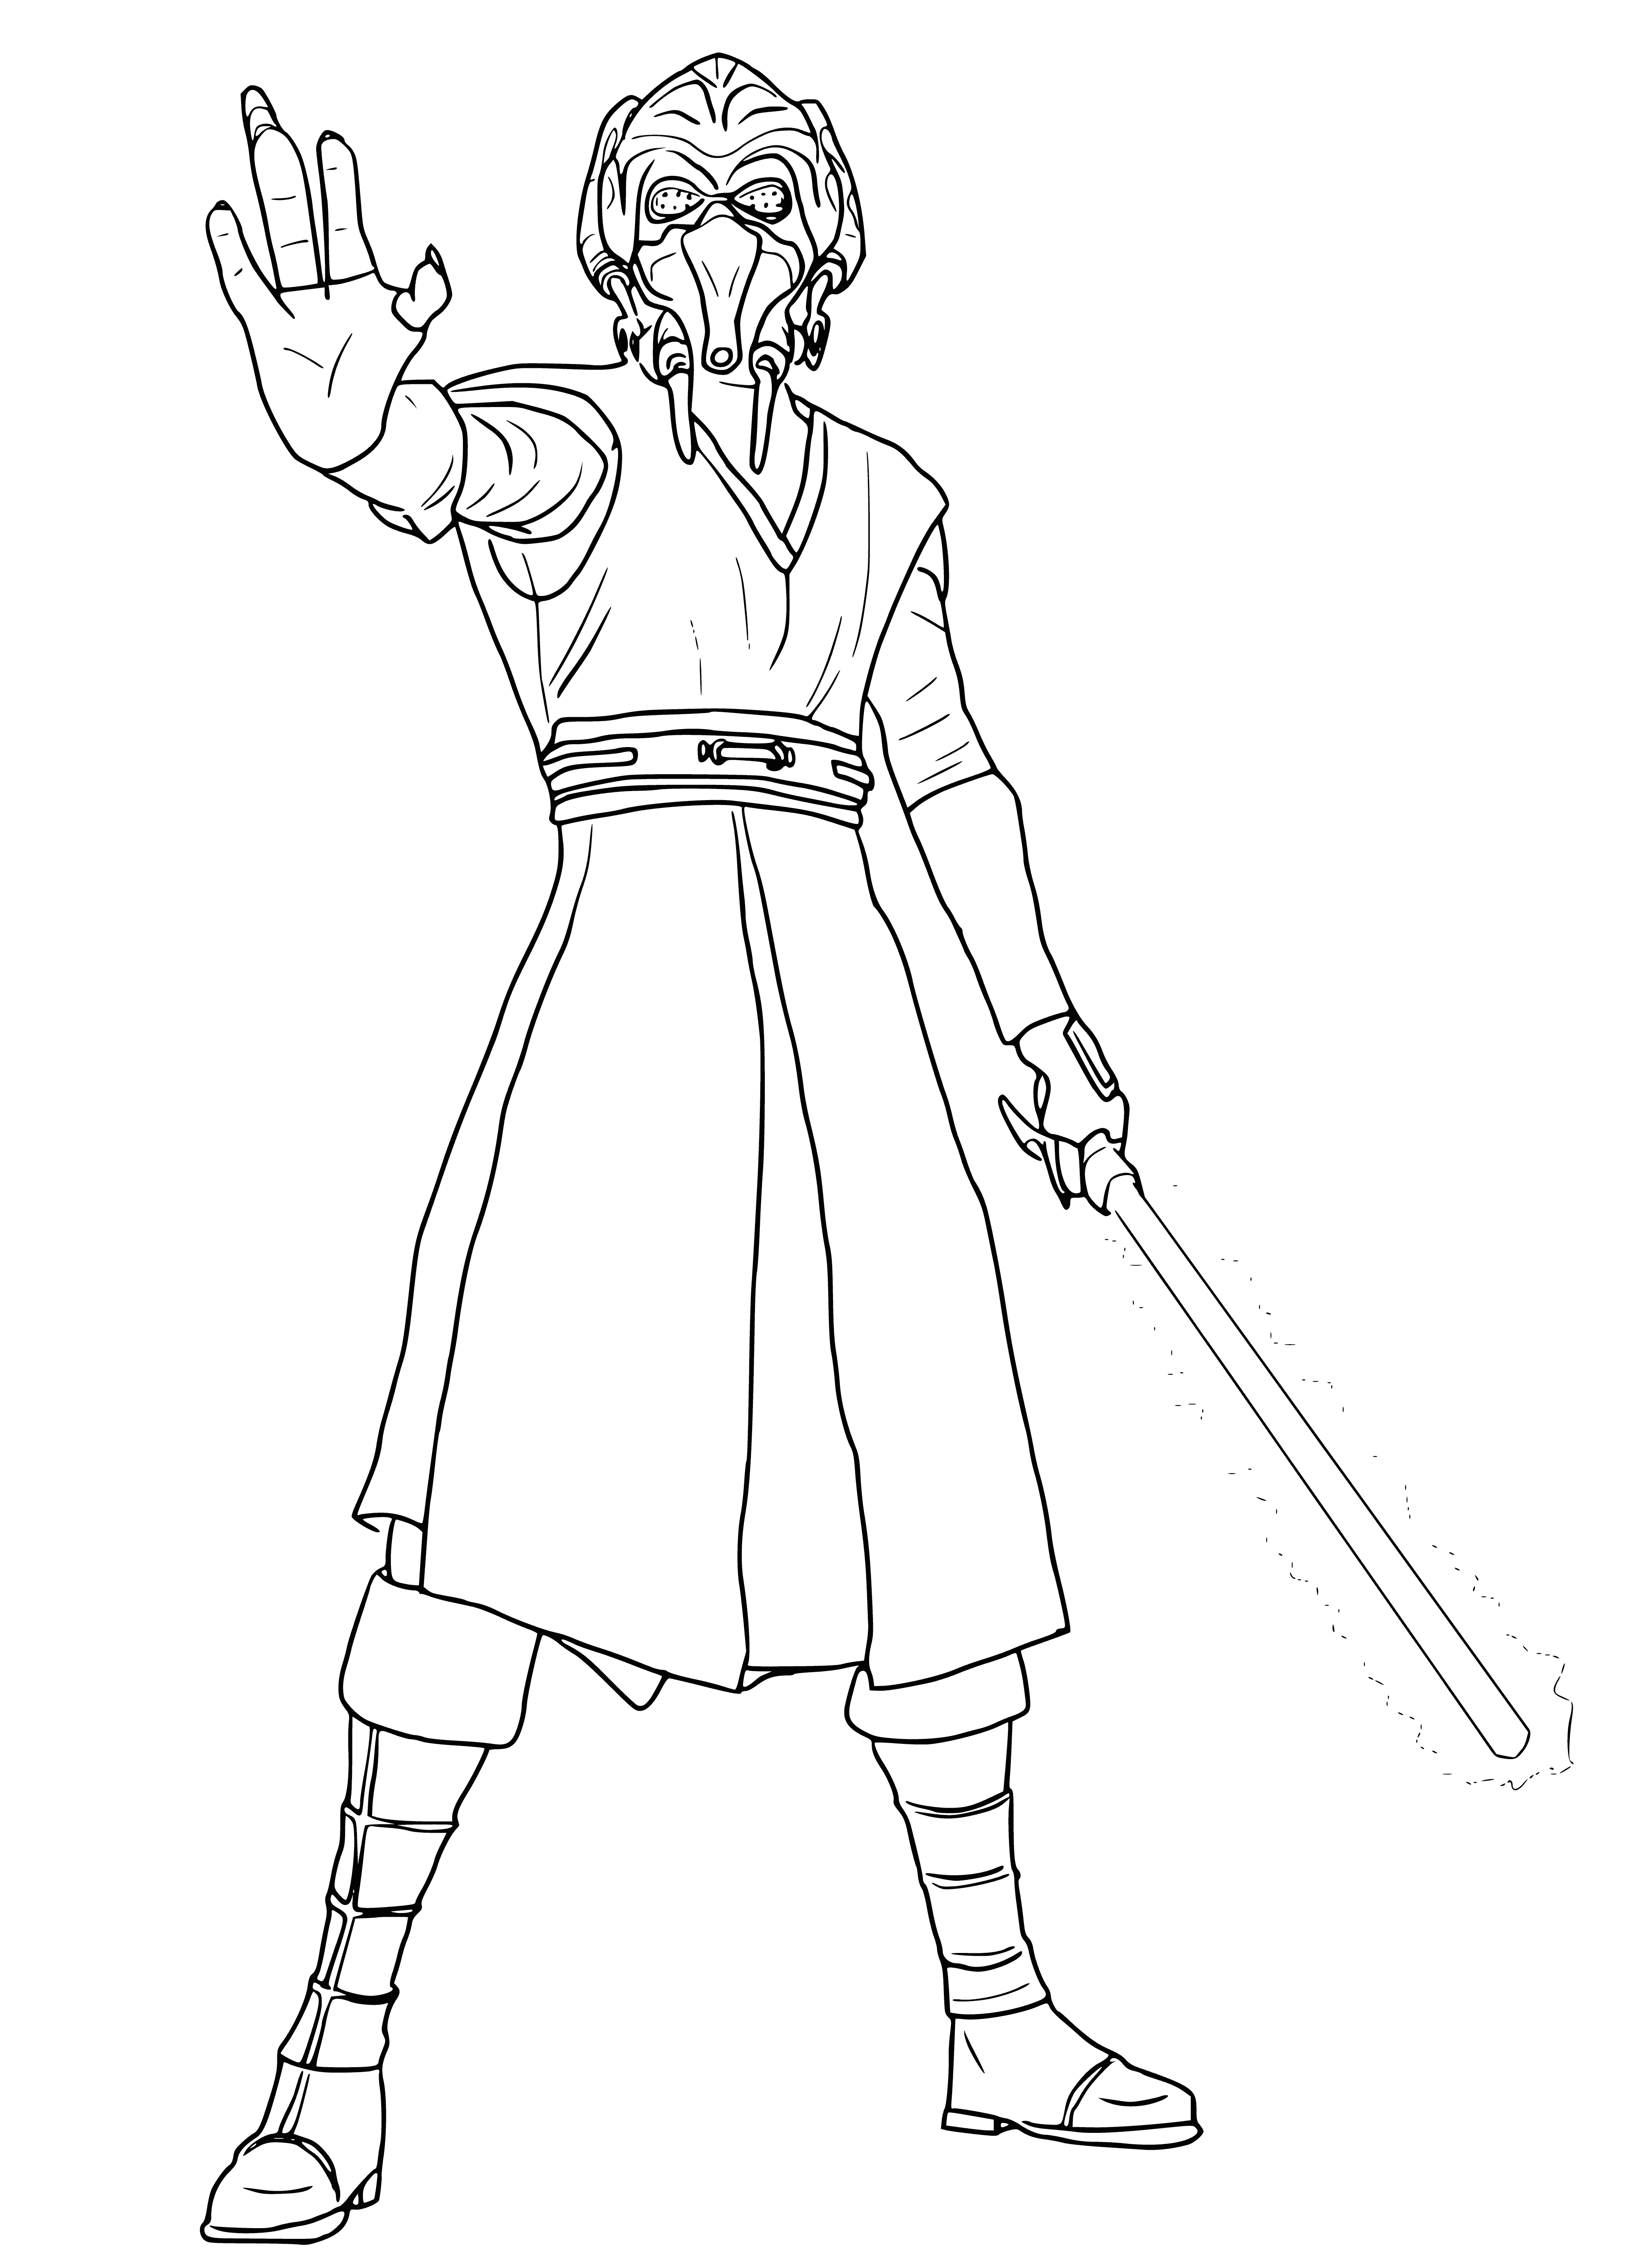 coloring page: Jedi Knight Plo Kun wields a blue lightsaber & stretches his arm towards the starry sky. #StarWars #JediKnight